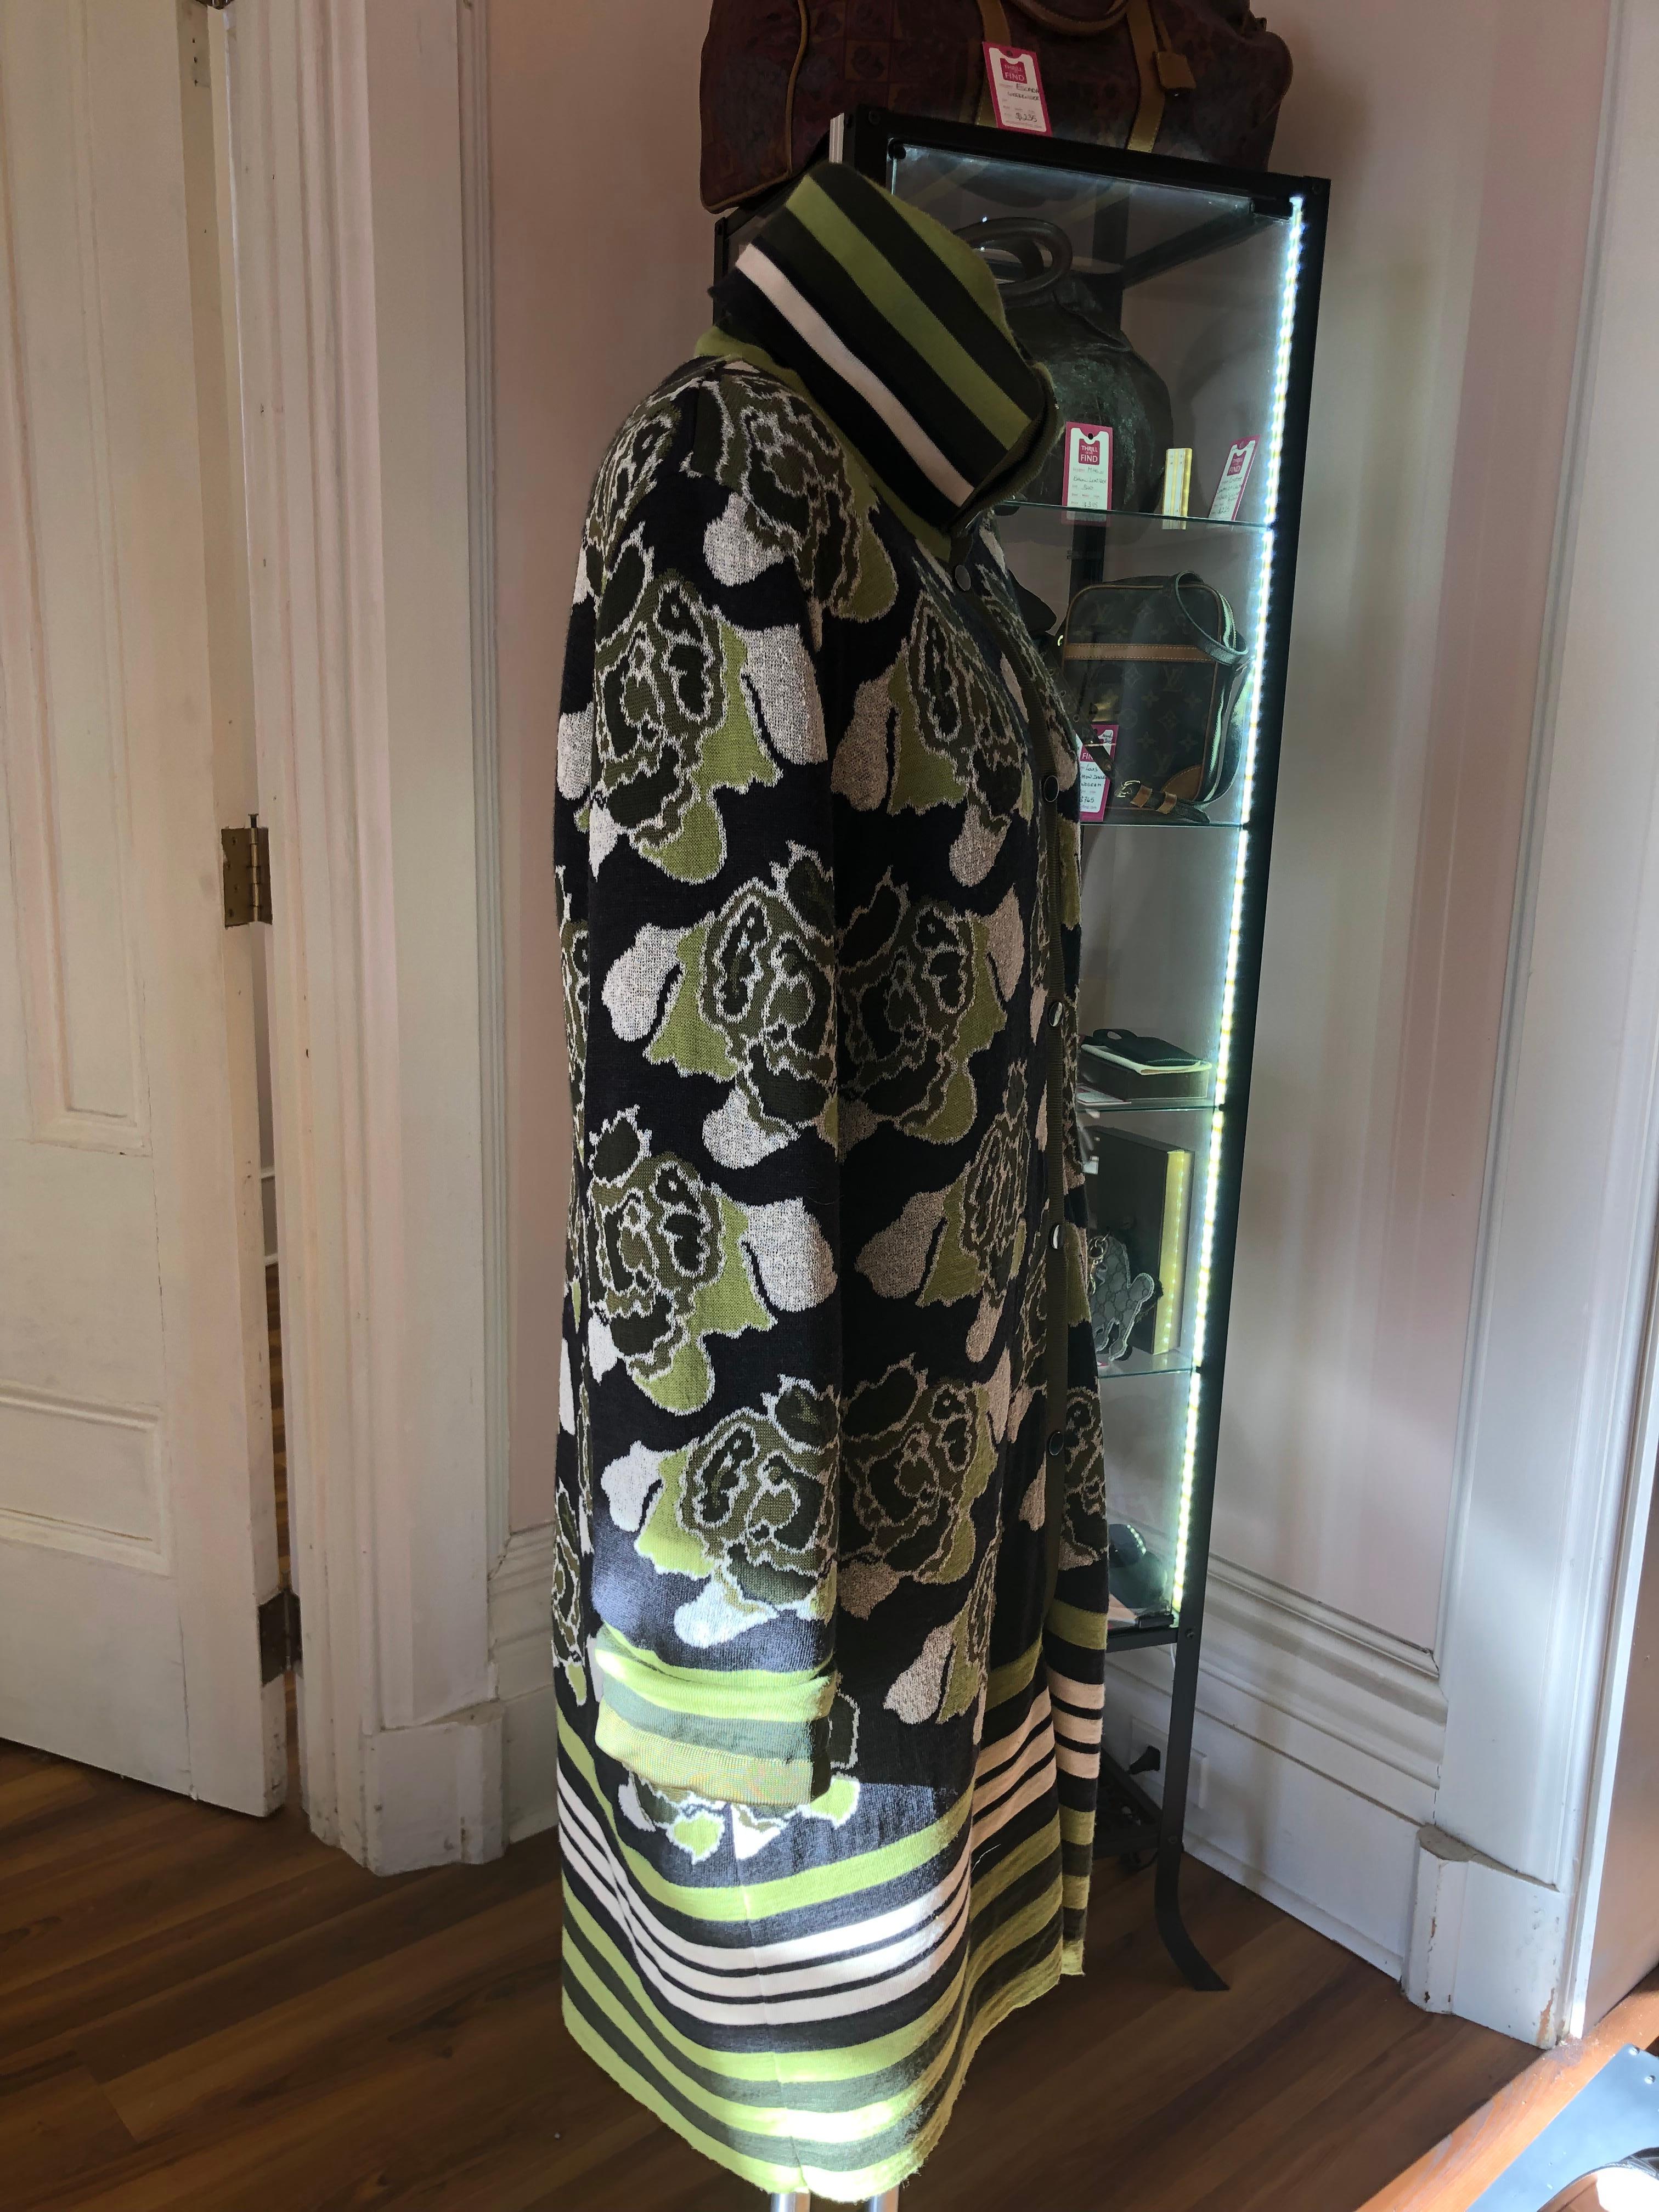 Superb M. Missoni vintage coat with a great roll up collar. There is a gros grain border; pocket; green cushioned lining and snap buttons. The print is floral and stripes.

A really beautiful piece and easy to wear.